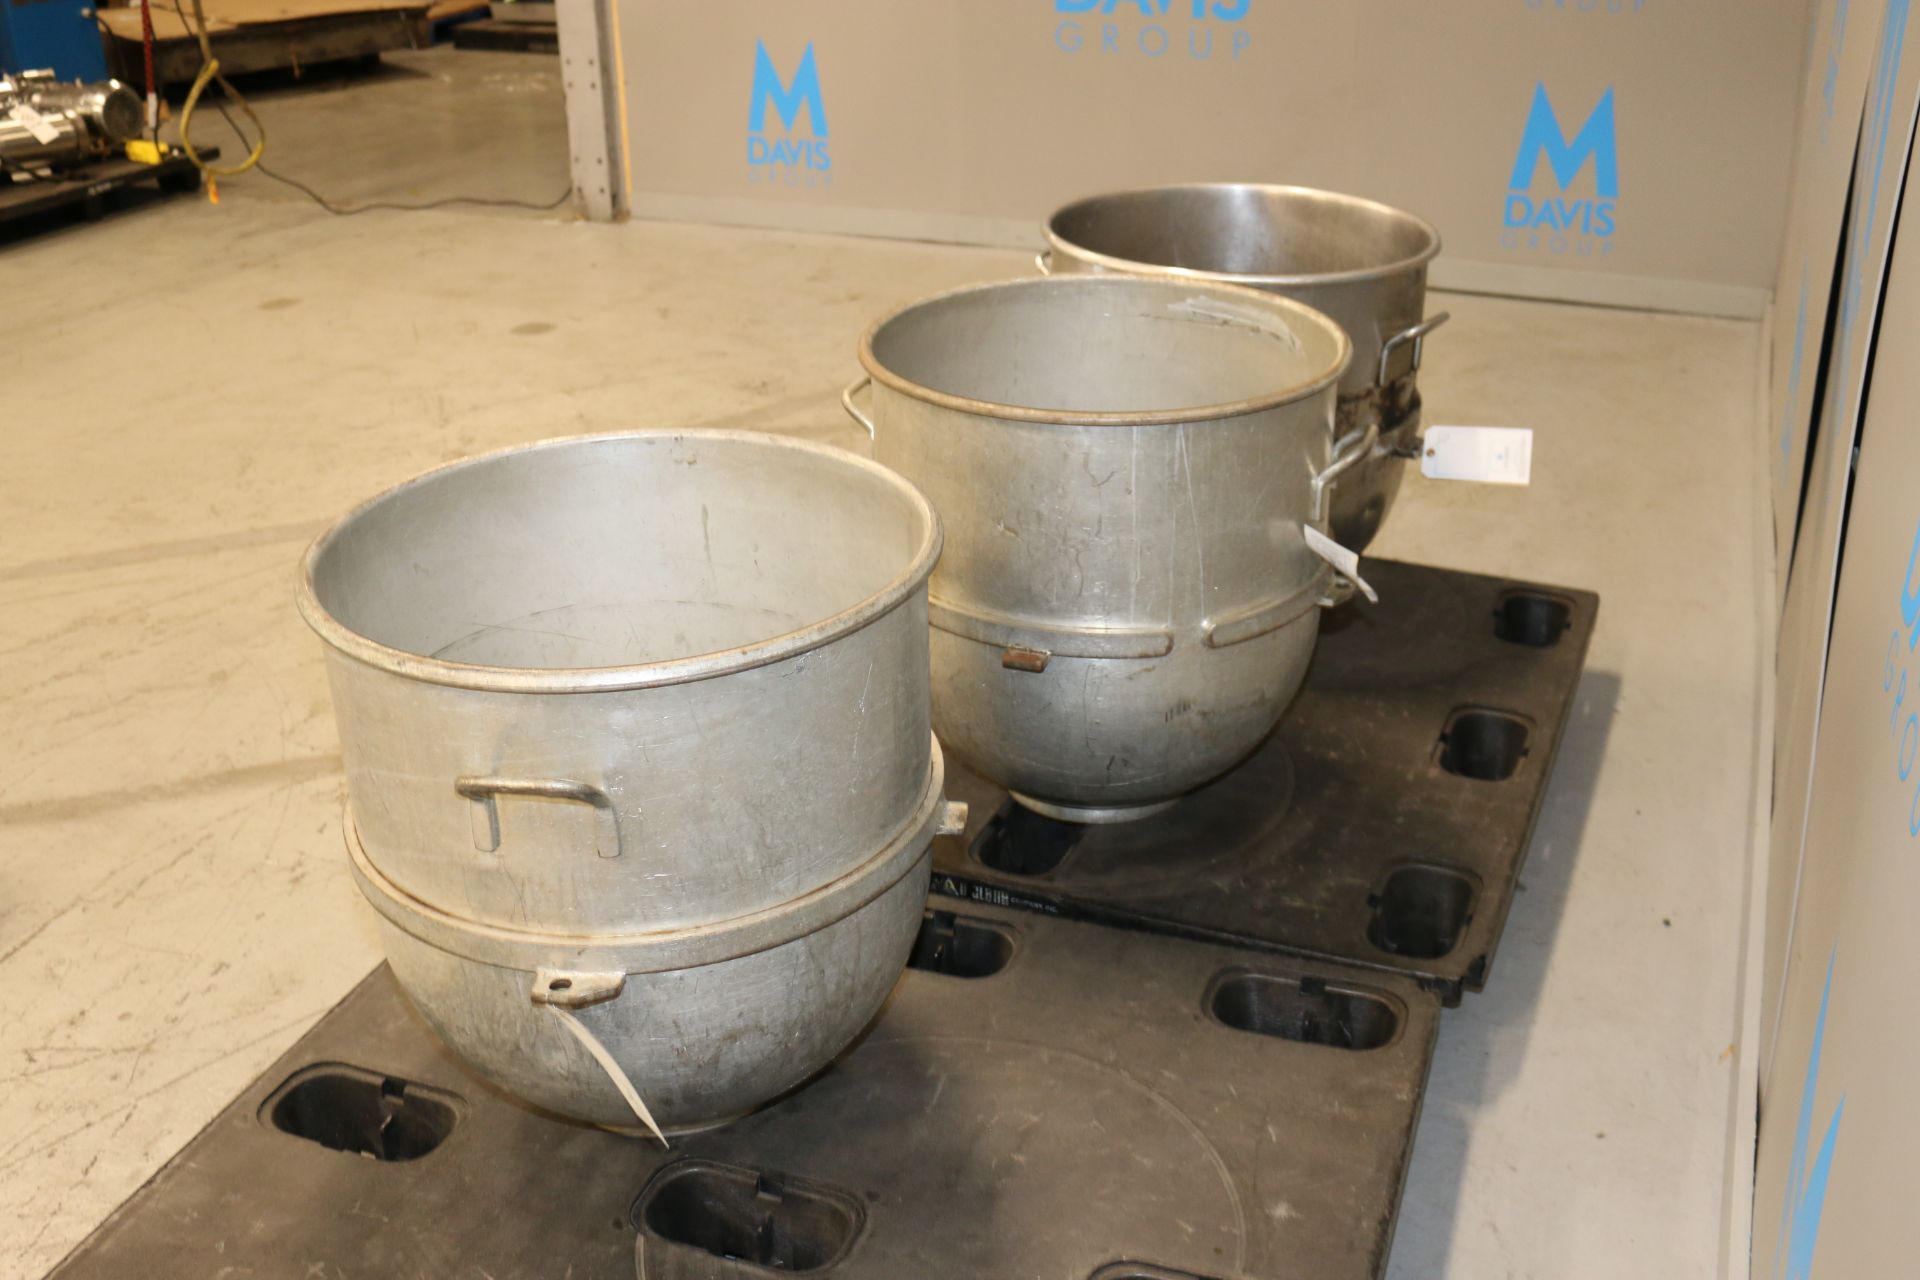 S/S & Aluminum Mixing Bowls, Aprox. 24" Dia. with Handles (IN#66089)(LOCATED AT M. DAVIS GROUP - Image 8 of 8